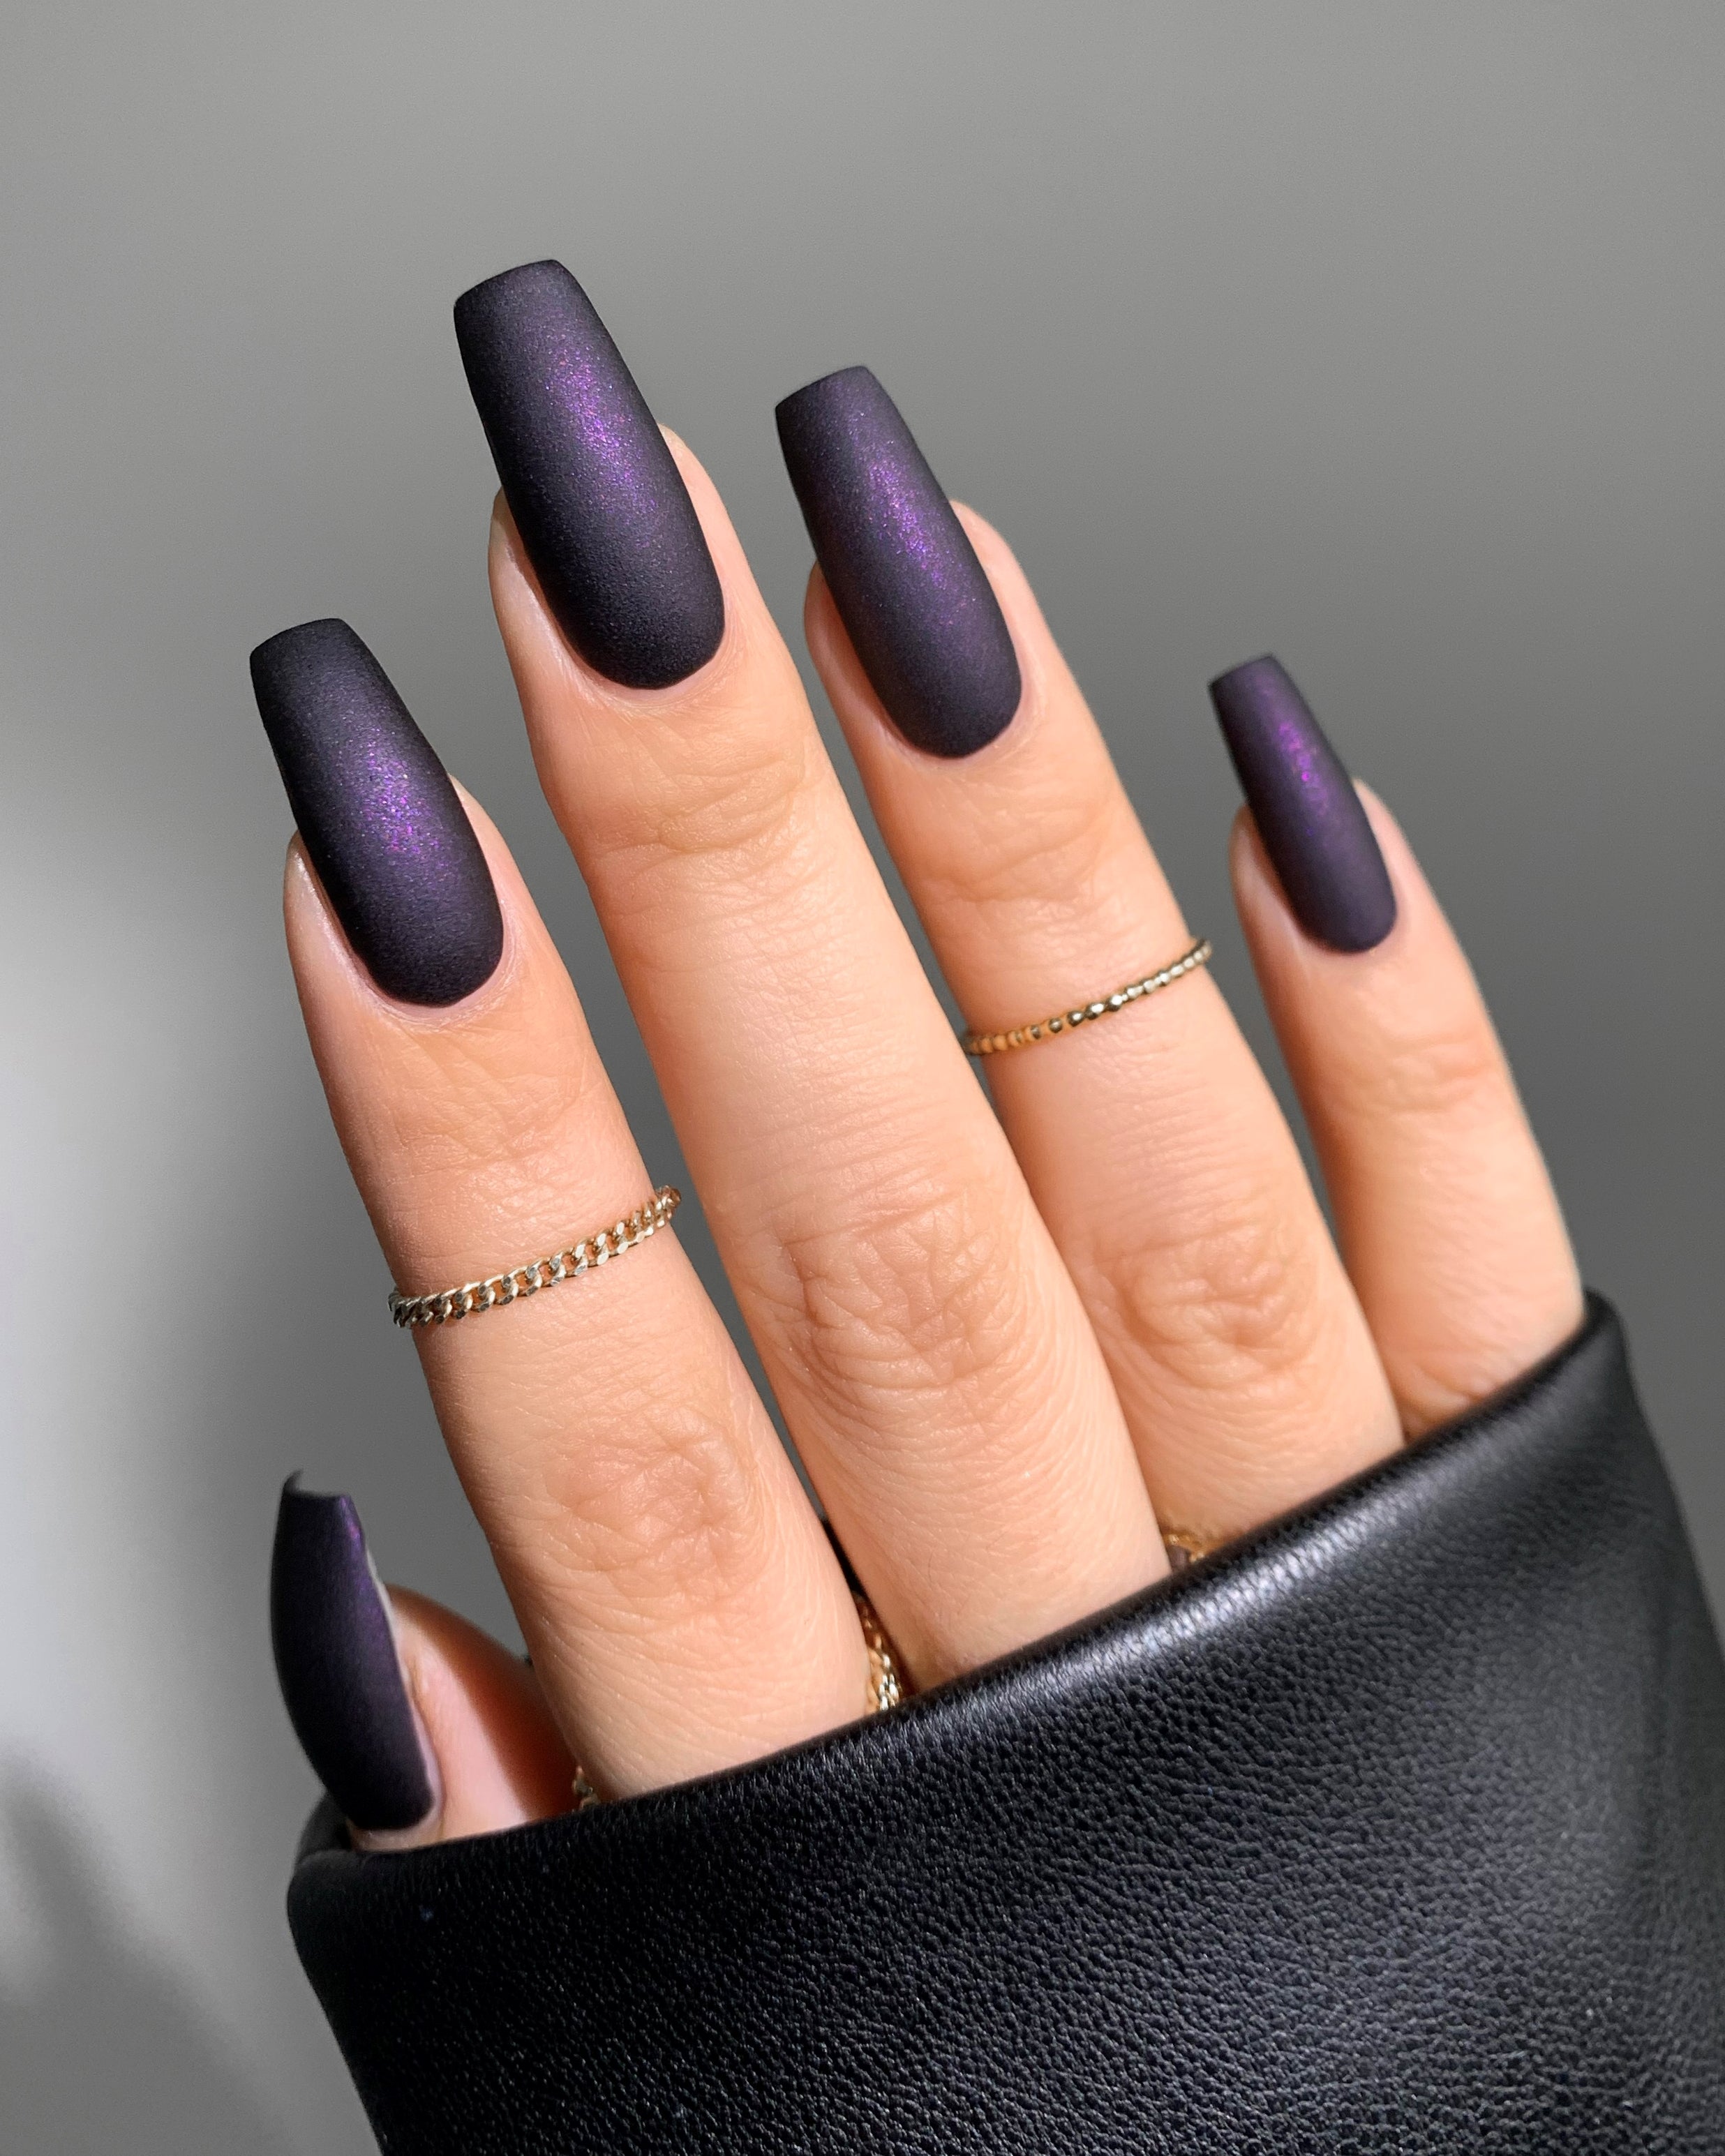 Make your nails stand out with MI Fashion's Matte Nail Polish Set